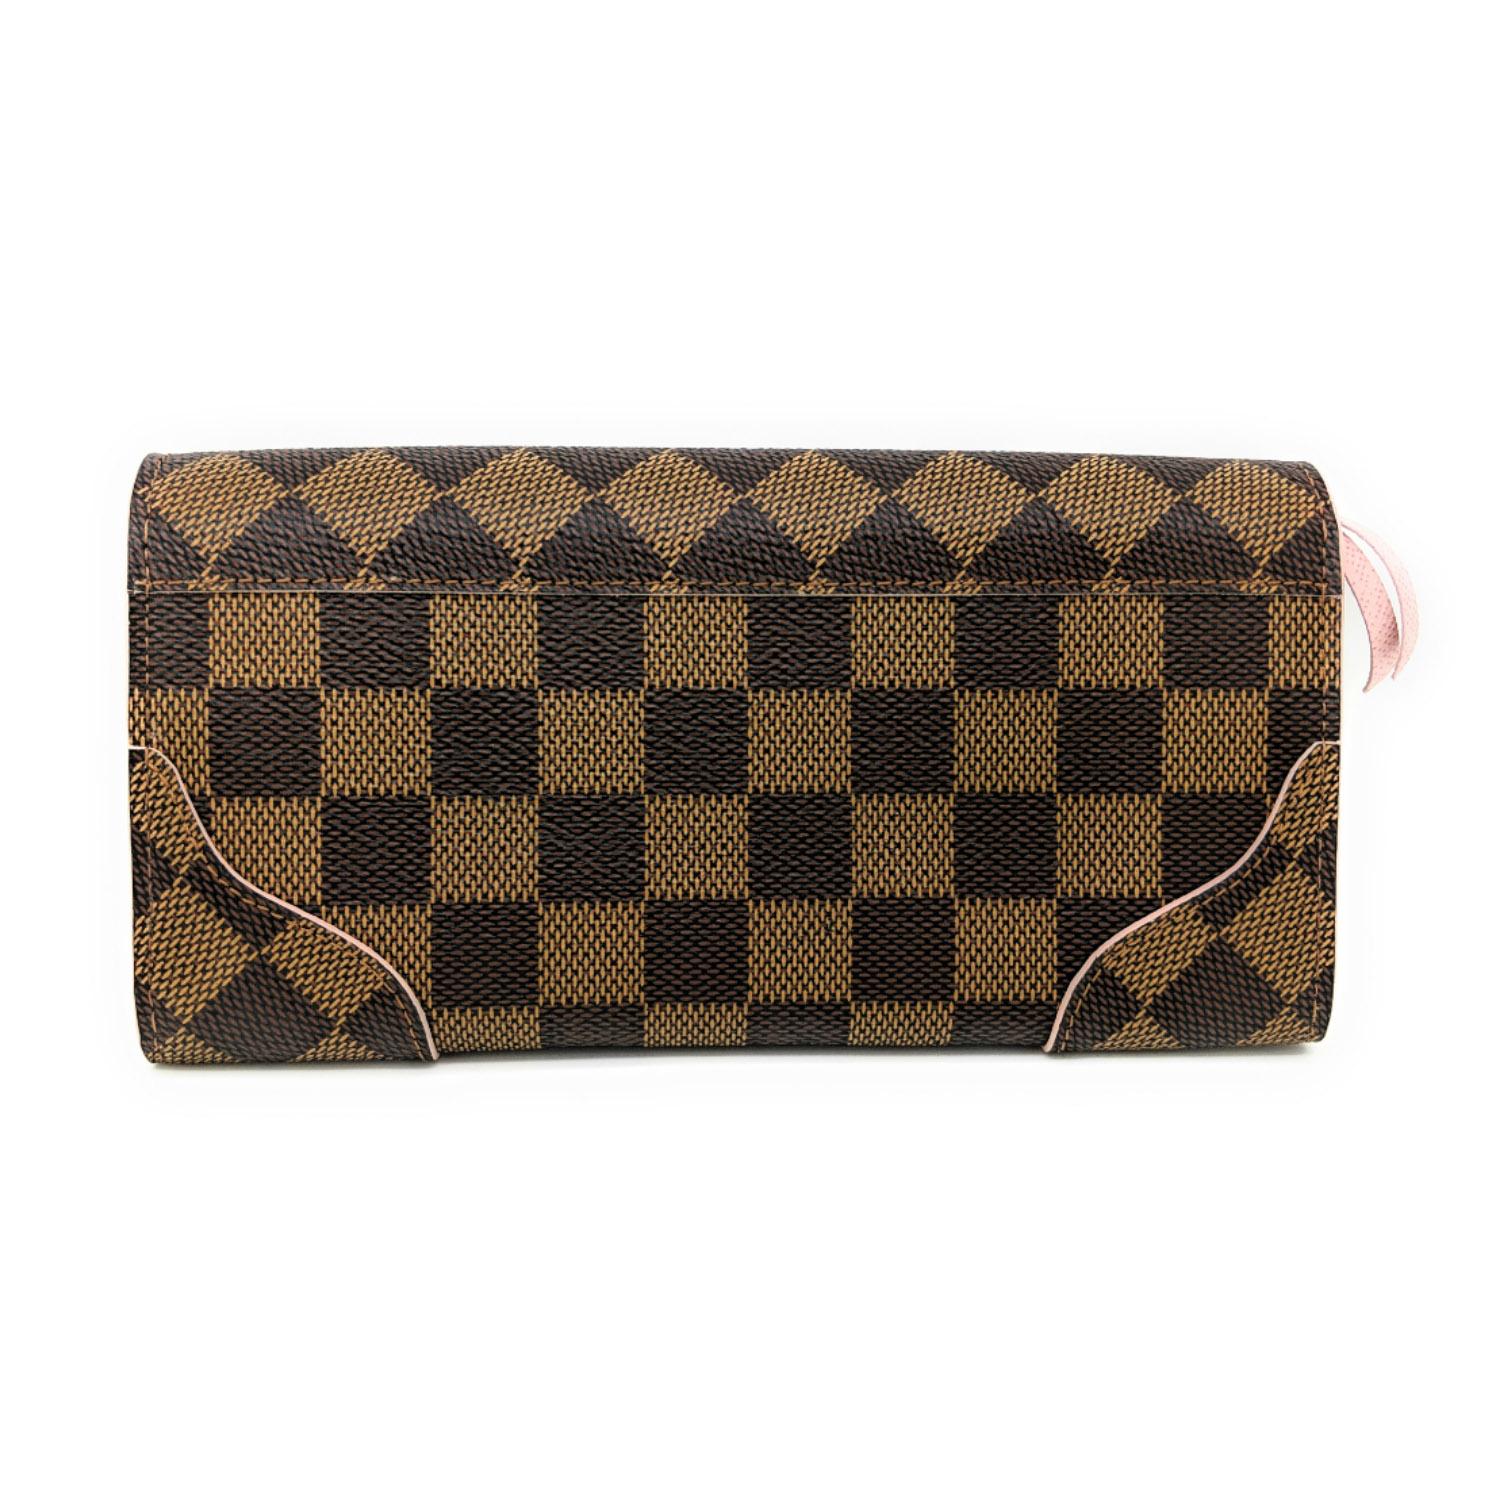 With this chic Louis Vuitton Rose Ballerine Damier Canvas Caissa Wallet, you can organize your cash, cards and coins in style. It features a damier canvas with a pleat that reveals a pink accent color with one outer slot and one center slot for your